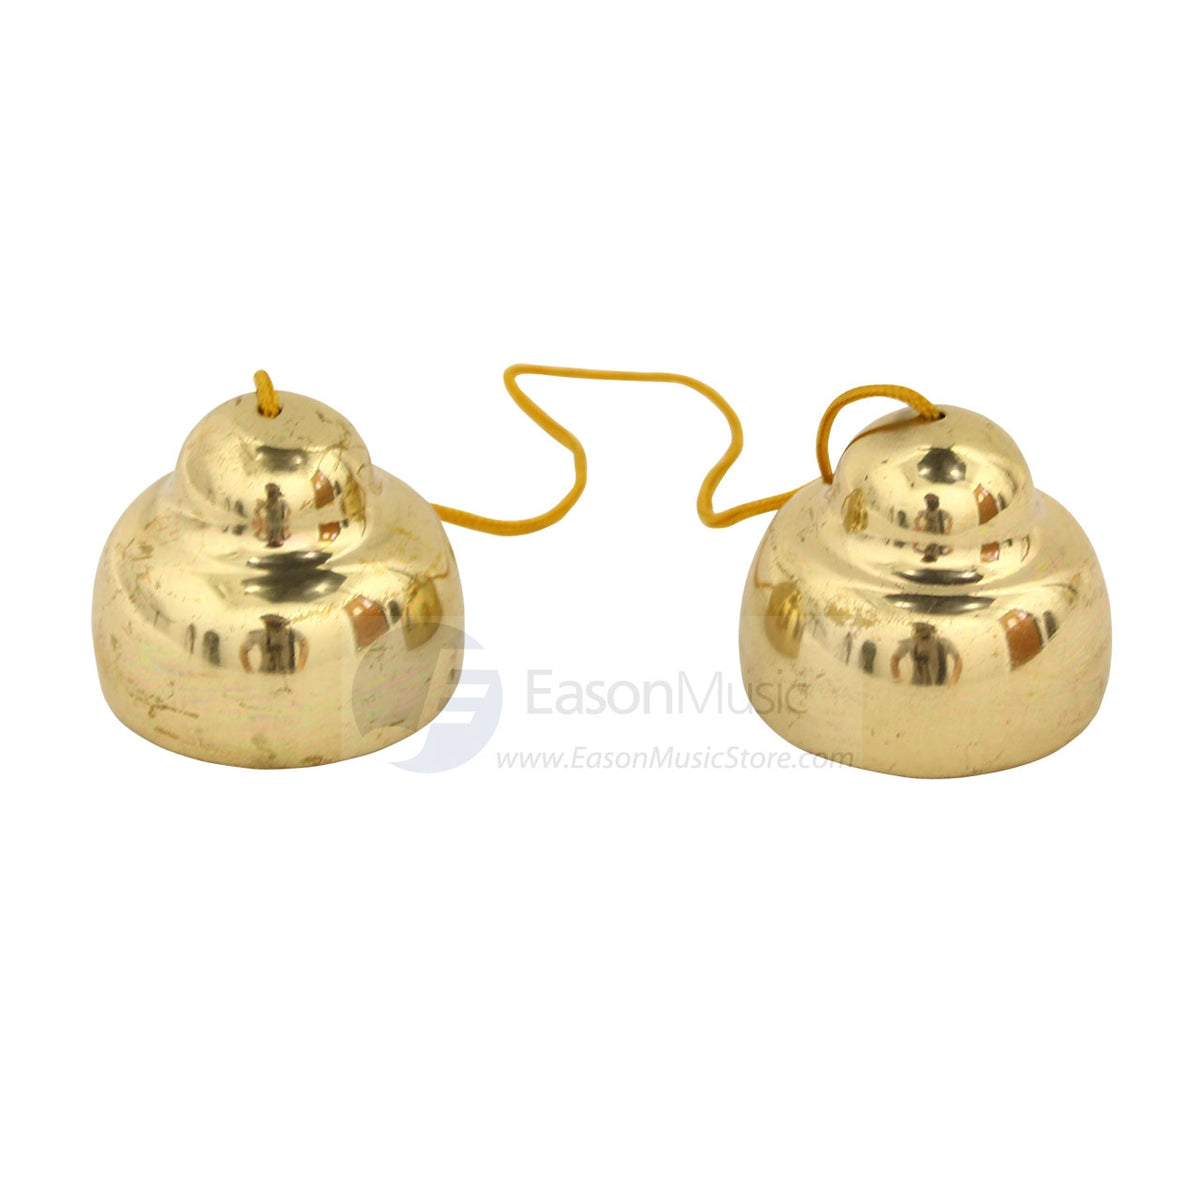 Weiss Pengling Bells - Small Pair on Rope